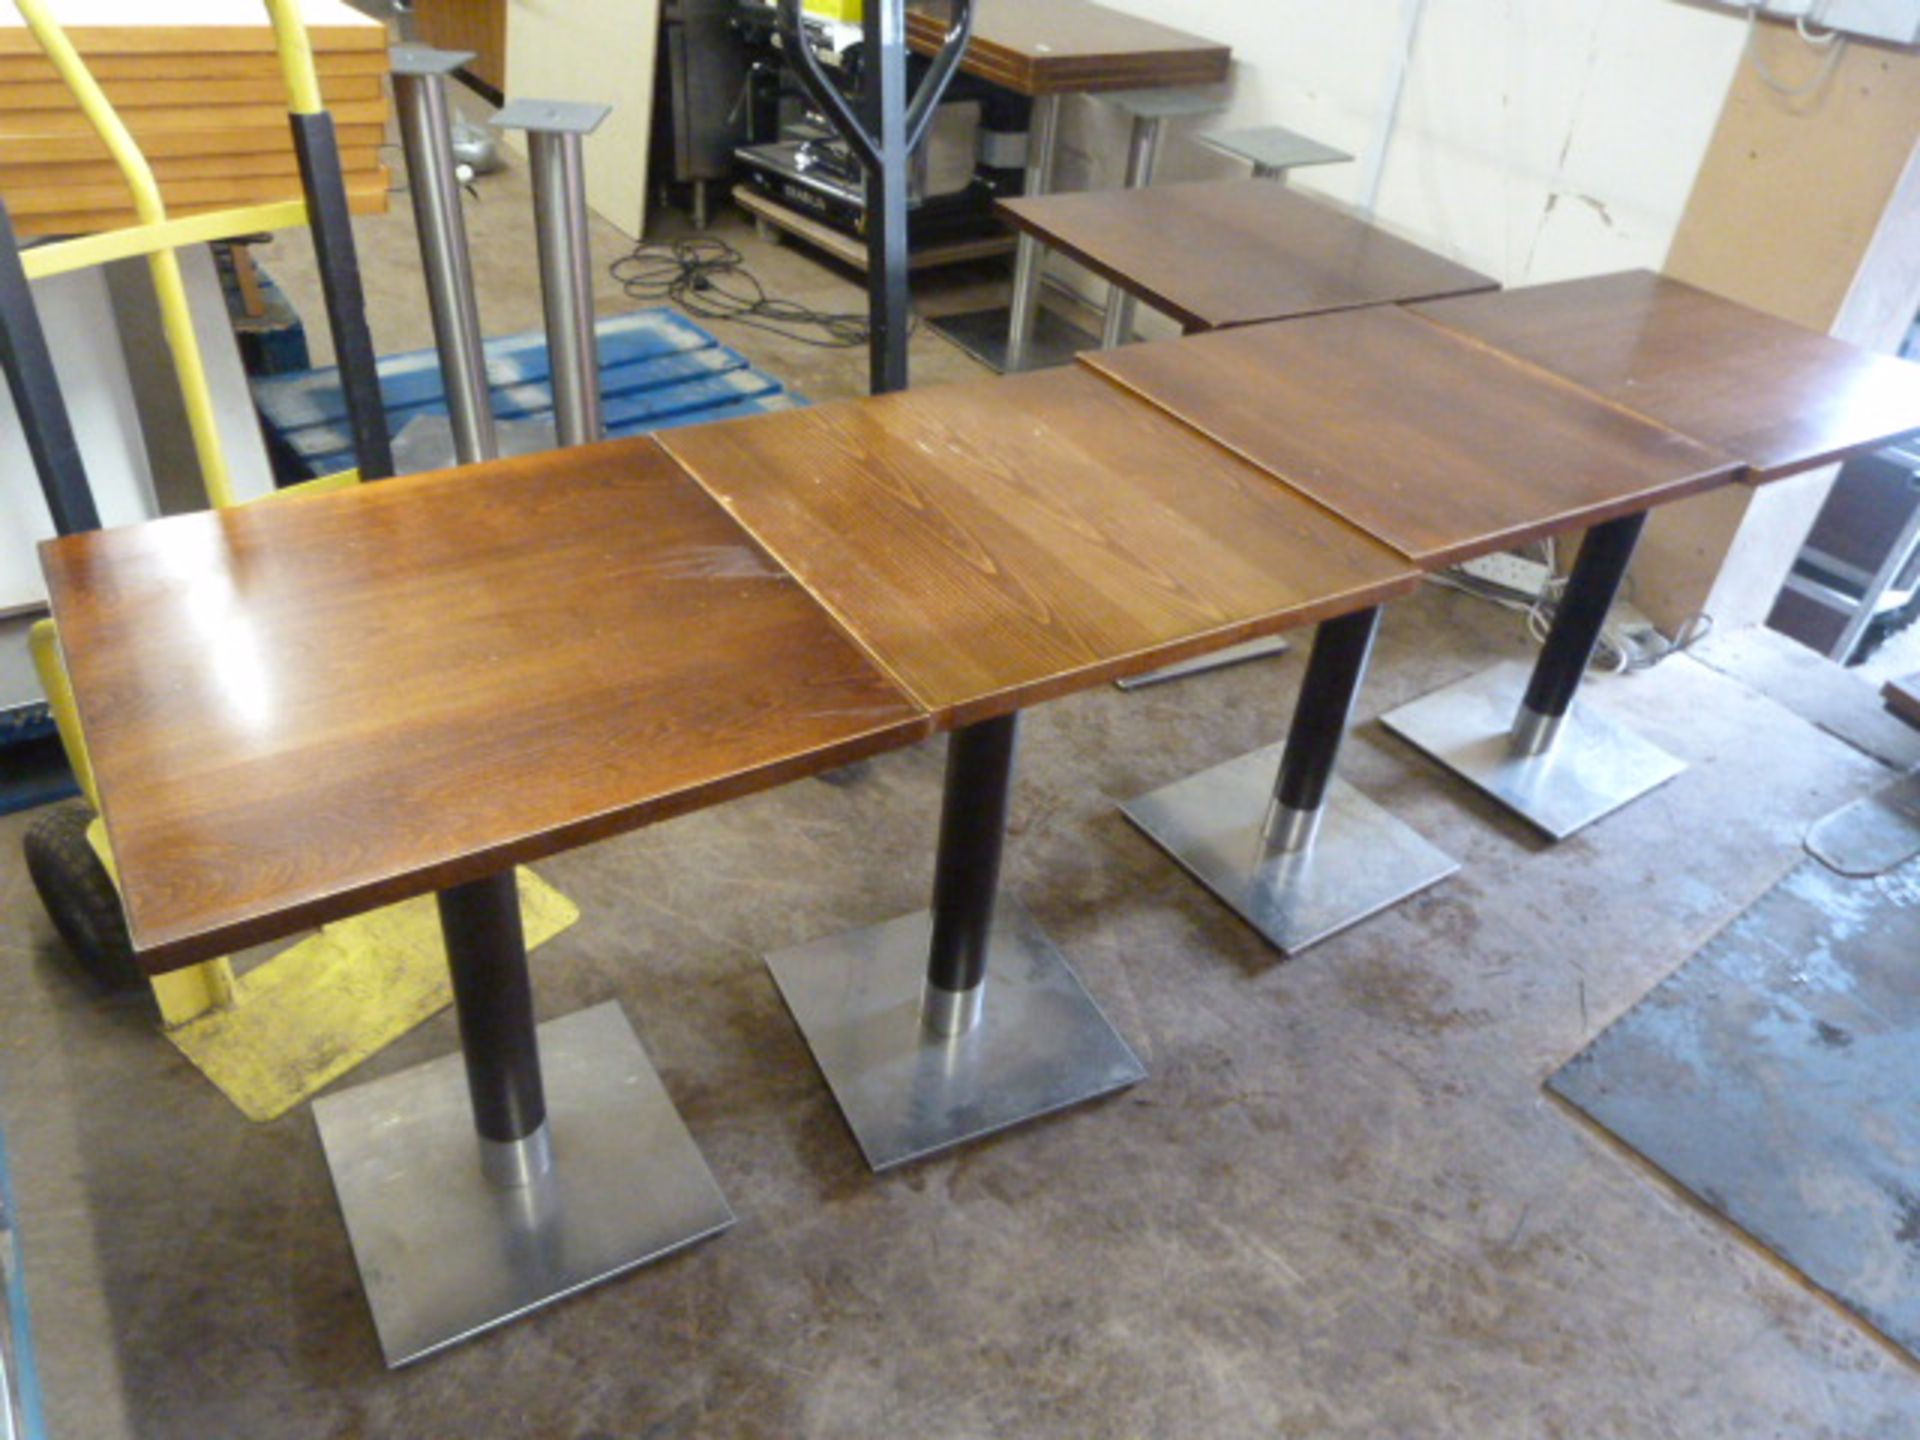 * Five Single Pedestal Tables 60x60x76cm (Holes may need drilling to fit, no fittings)